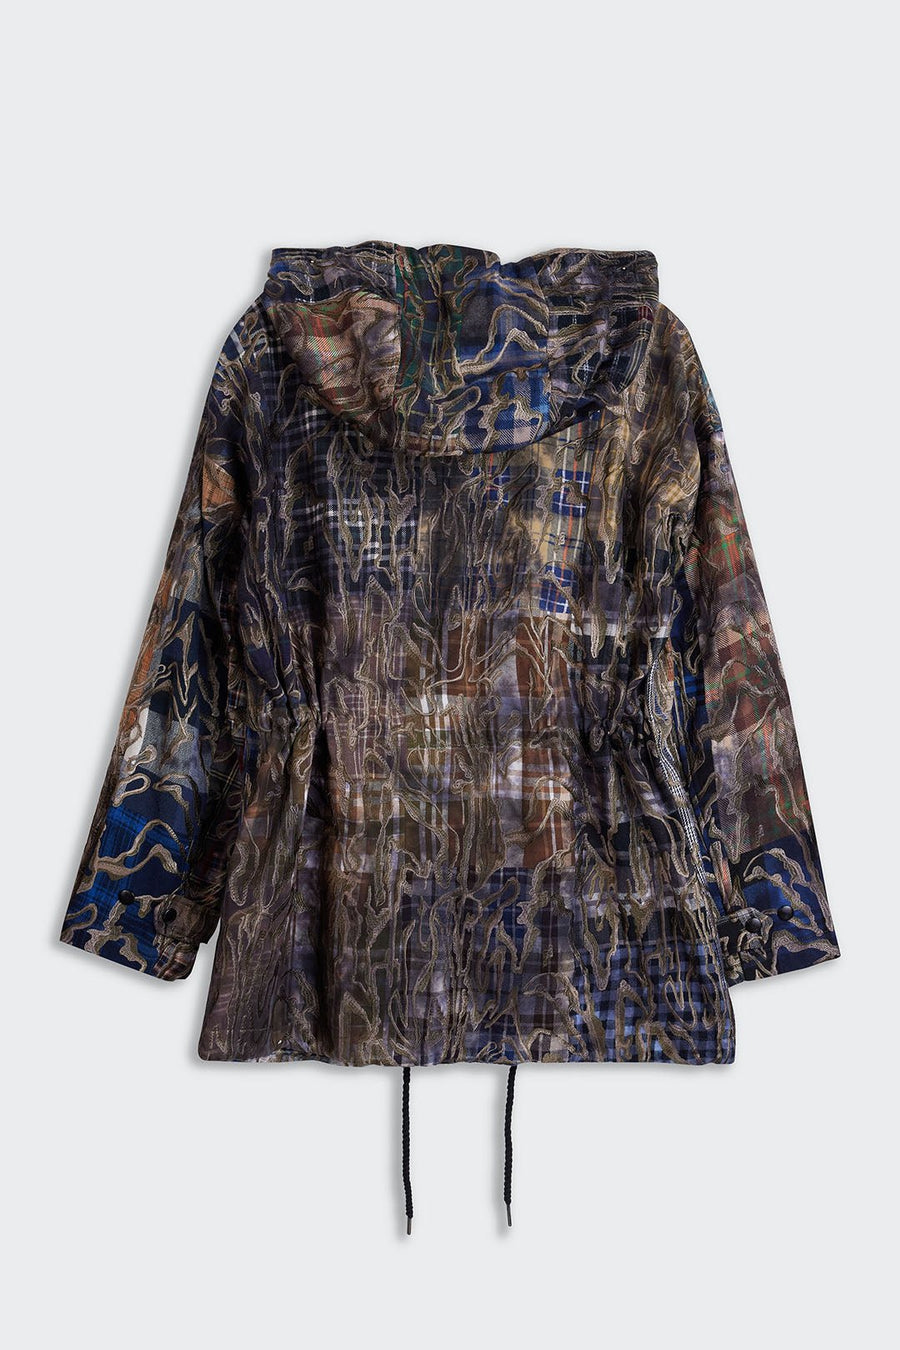 THE DRYAD HOODIE, MULTI - Burning Torch Online Boutique